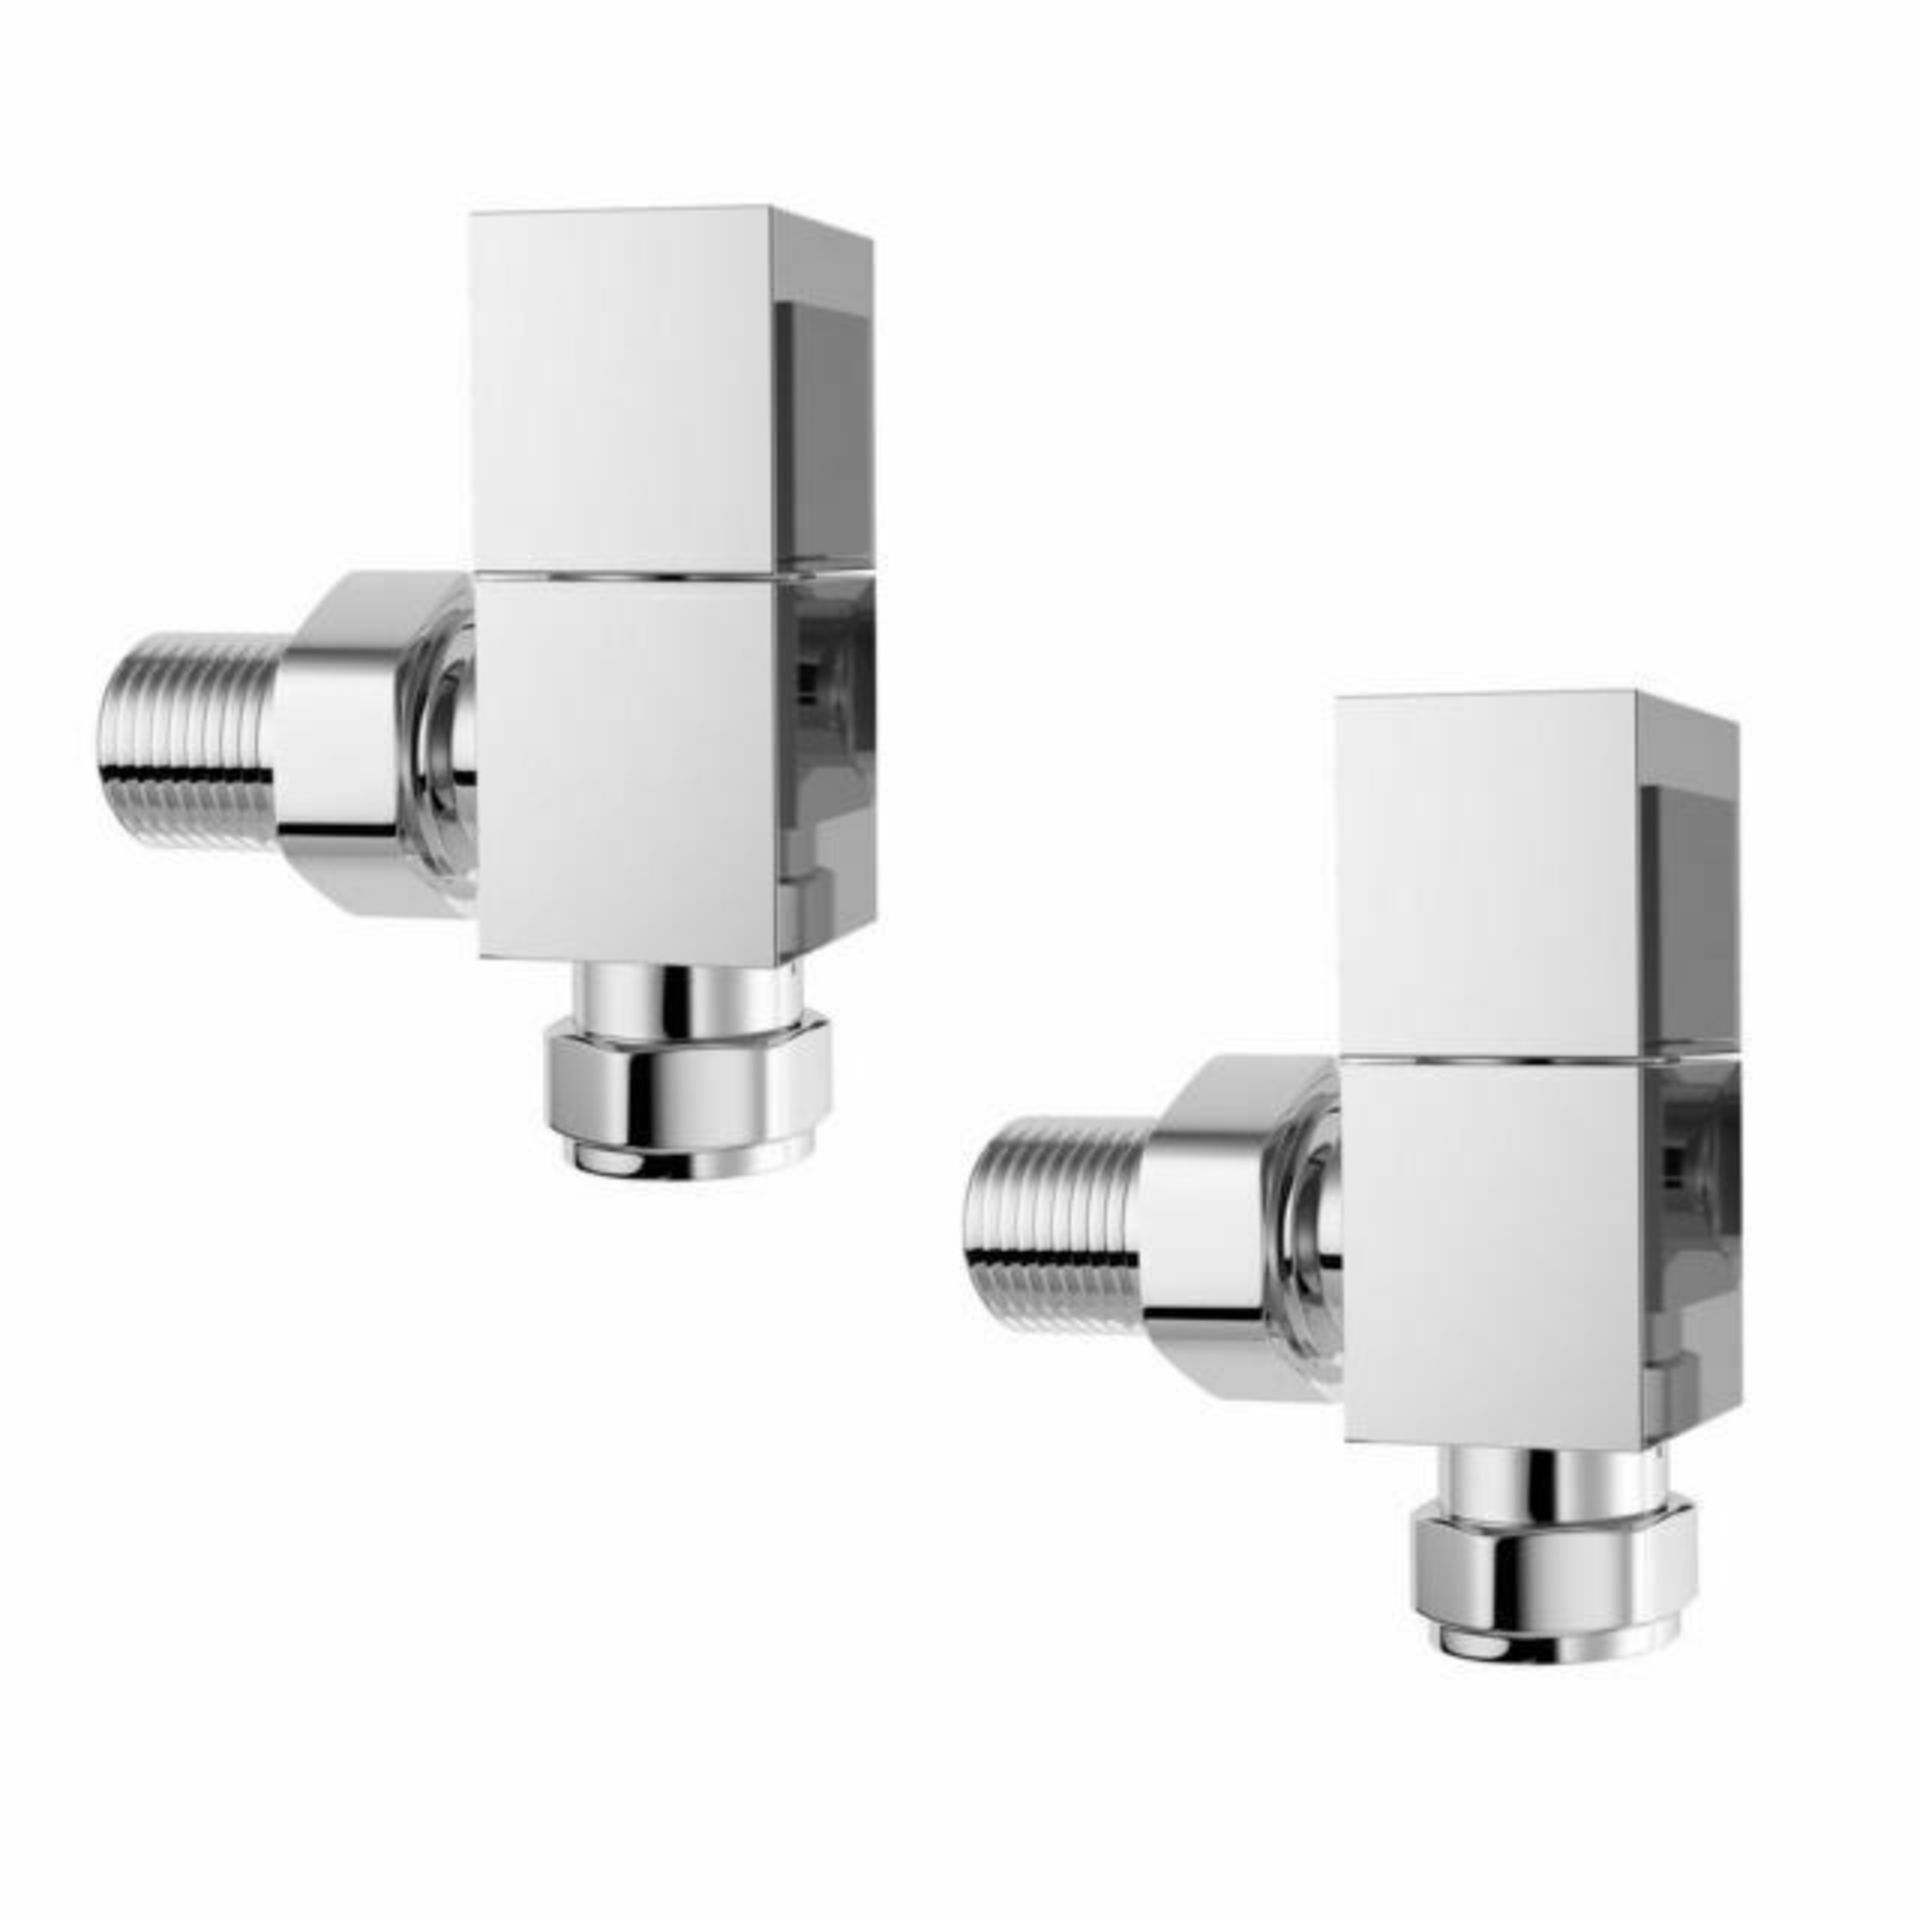 Square Chrome Angled Radiator Valves 15mm Central Heating Taps Ra35A. Chrome Plated Solid Bras... - Image 2 of 2